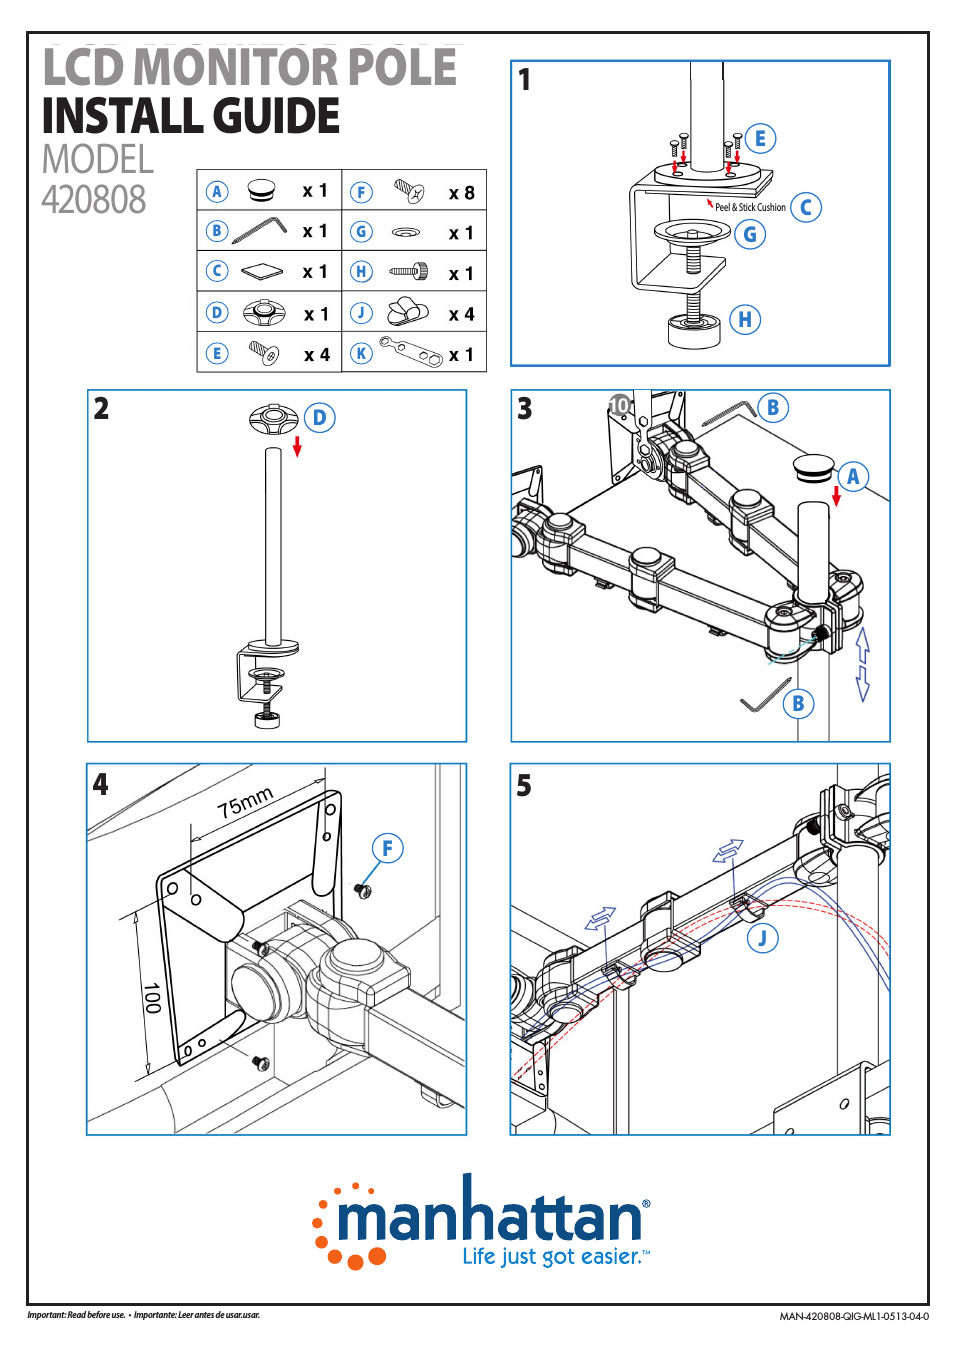 420808 LCD Monitor Mount with Double-Link Swing Arms - Quick Install (Multi)